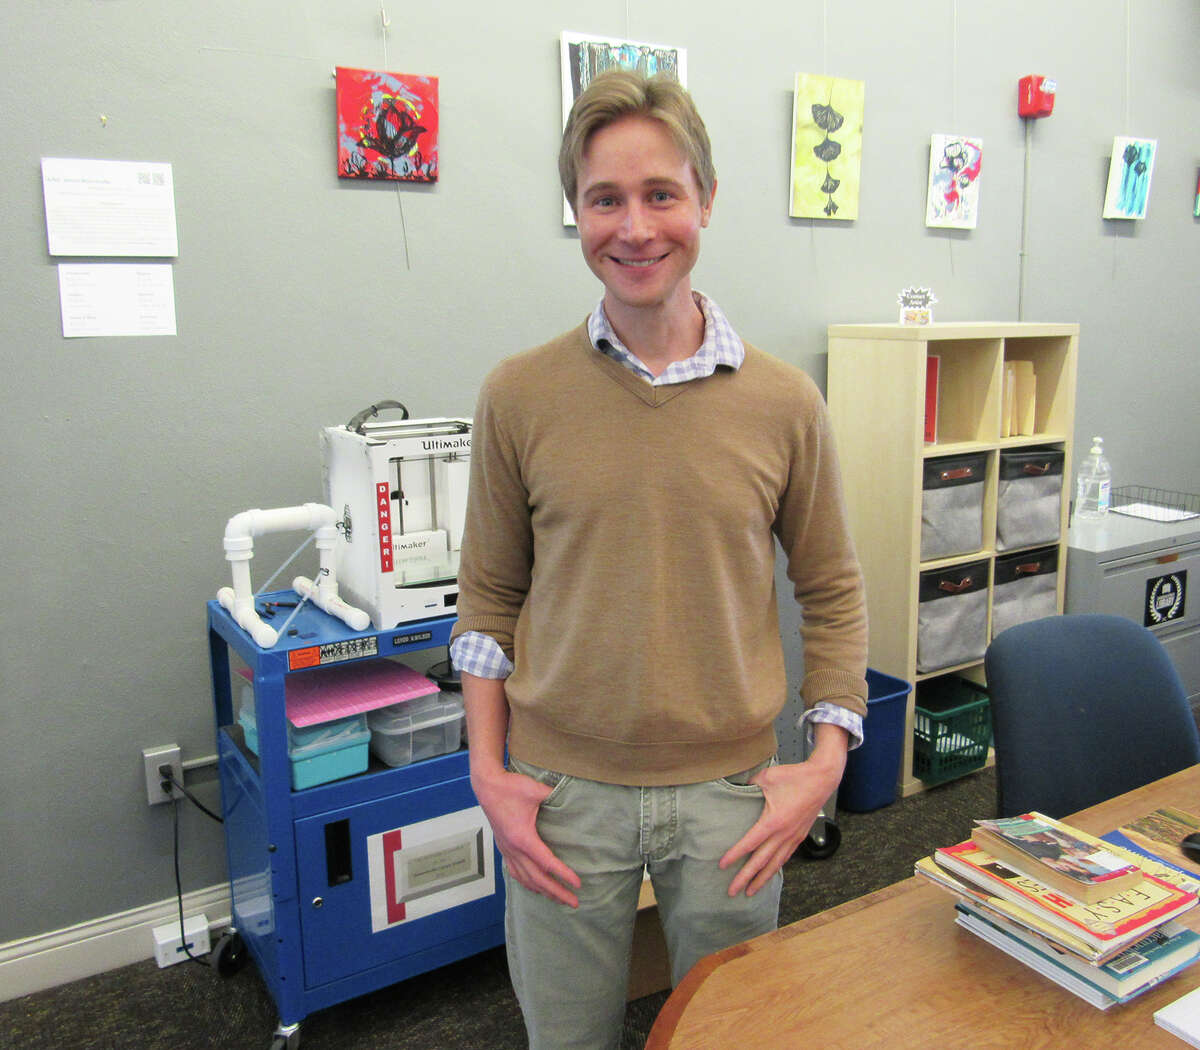 Michael Ackerman is the new Head Librarian of Adult Services at the Edwardsville Public Library.